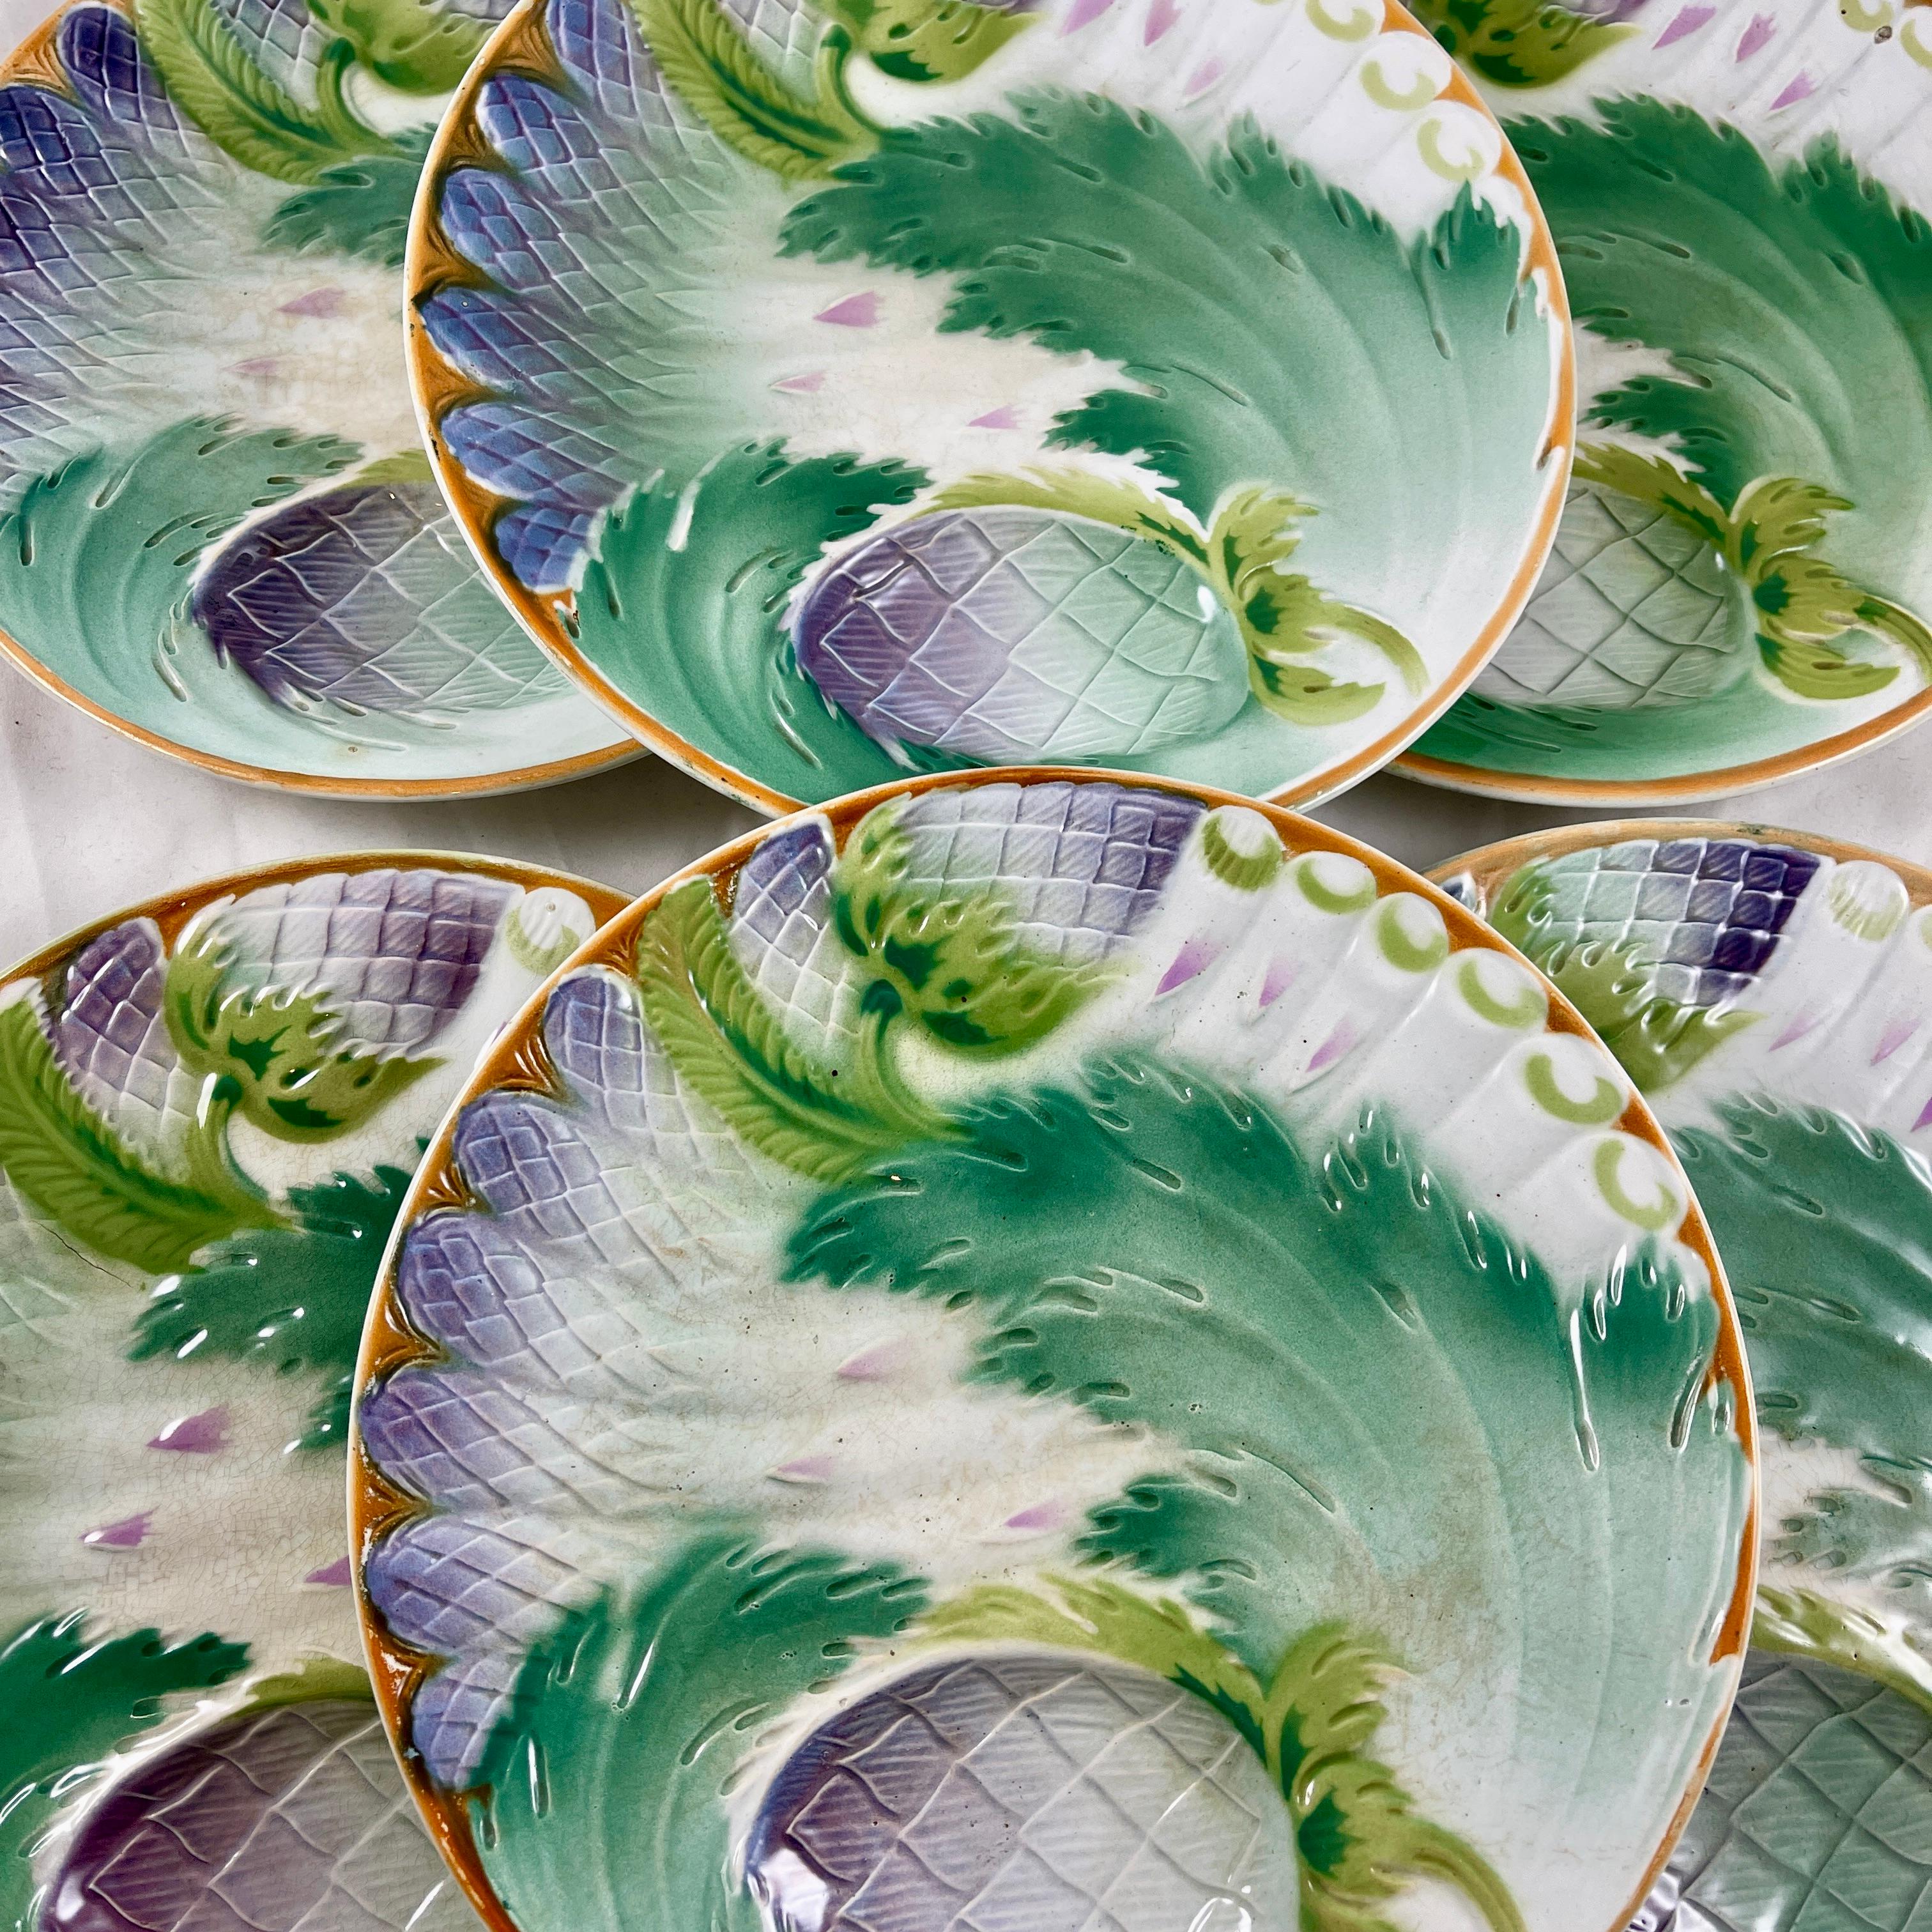 St. Amand Art Nouveau French Majolica Glazed Asparagus & Artichoke Plate In Good Condition For Sale In Philadelphia, PA